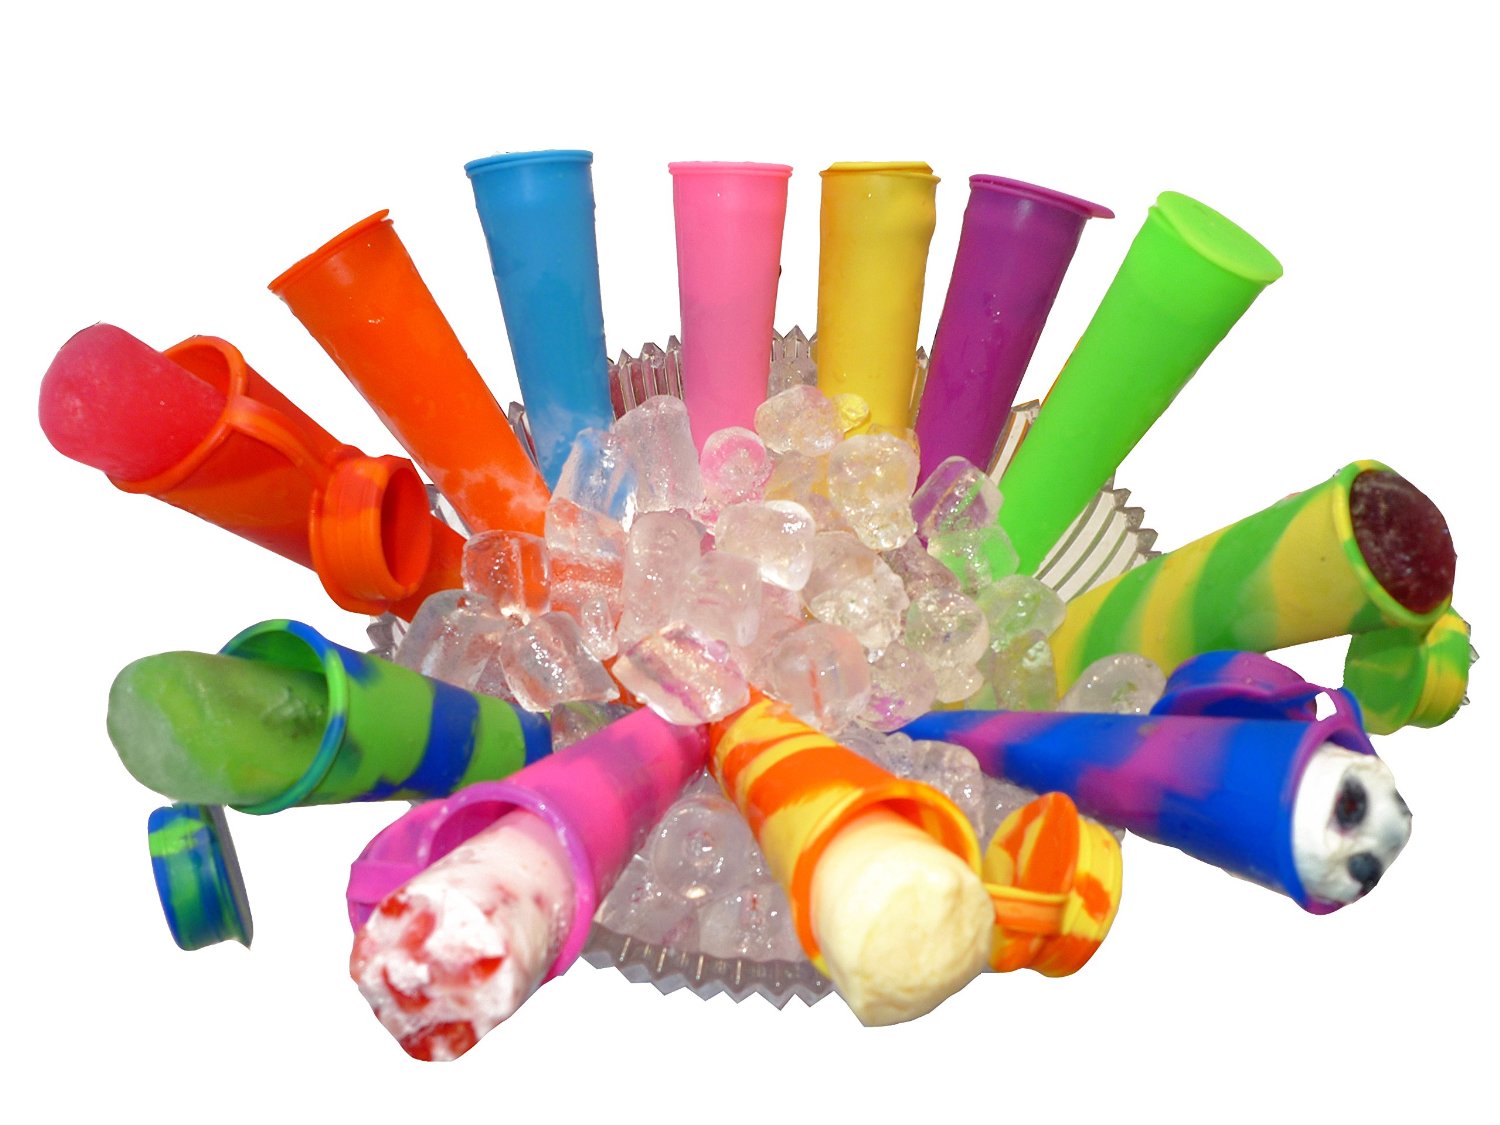 Premium Silicone Popsicle Molds - 6 Pack - Ice Pop Maker - Fun Vibrant  Colors!